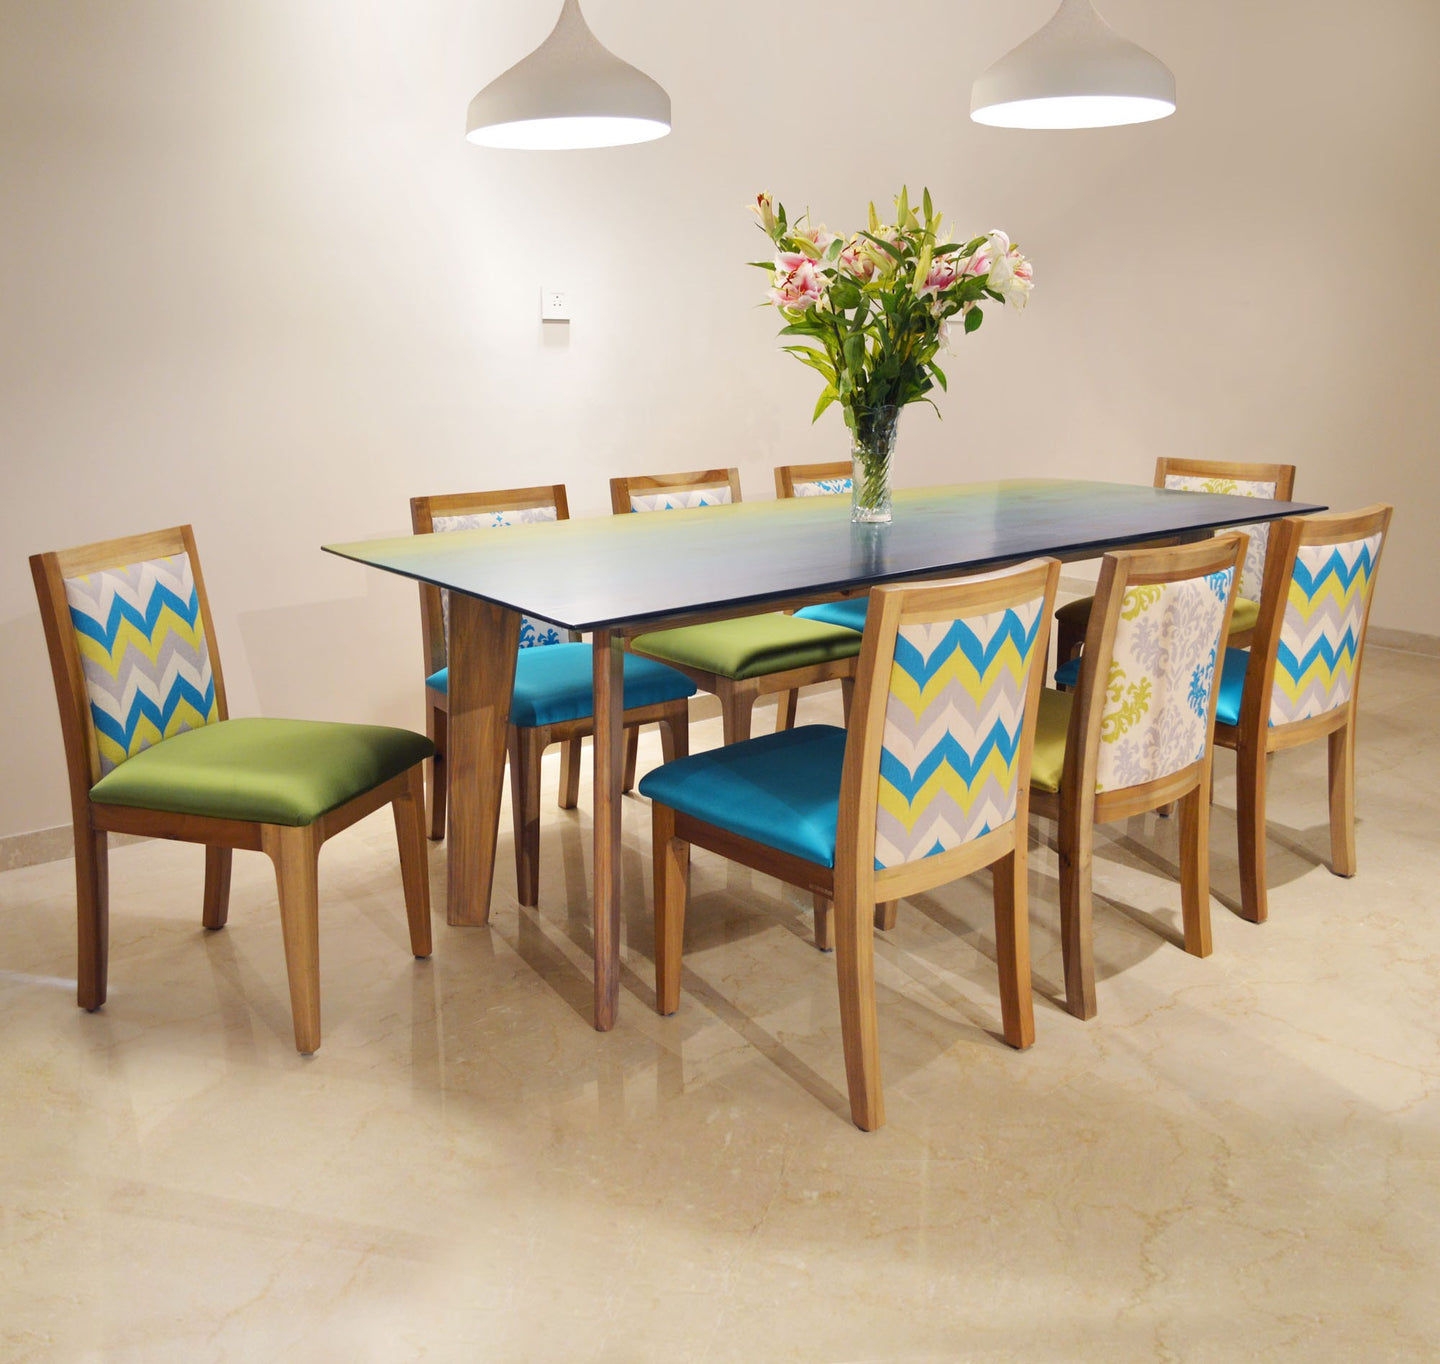 Blue and Olive Maldives Inspired Solid Wood 8 Seater Dining Set